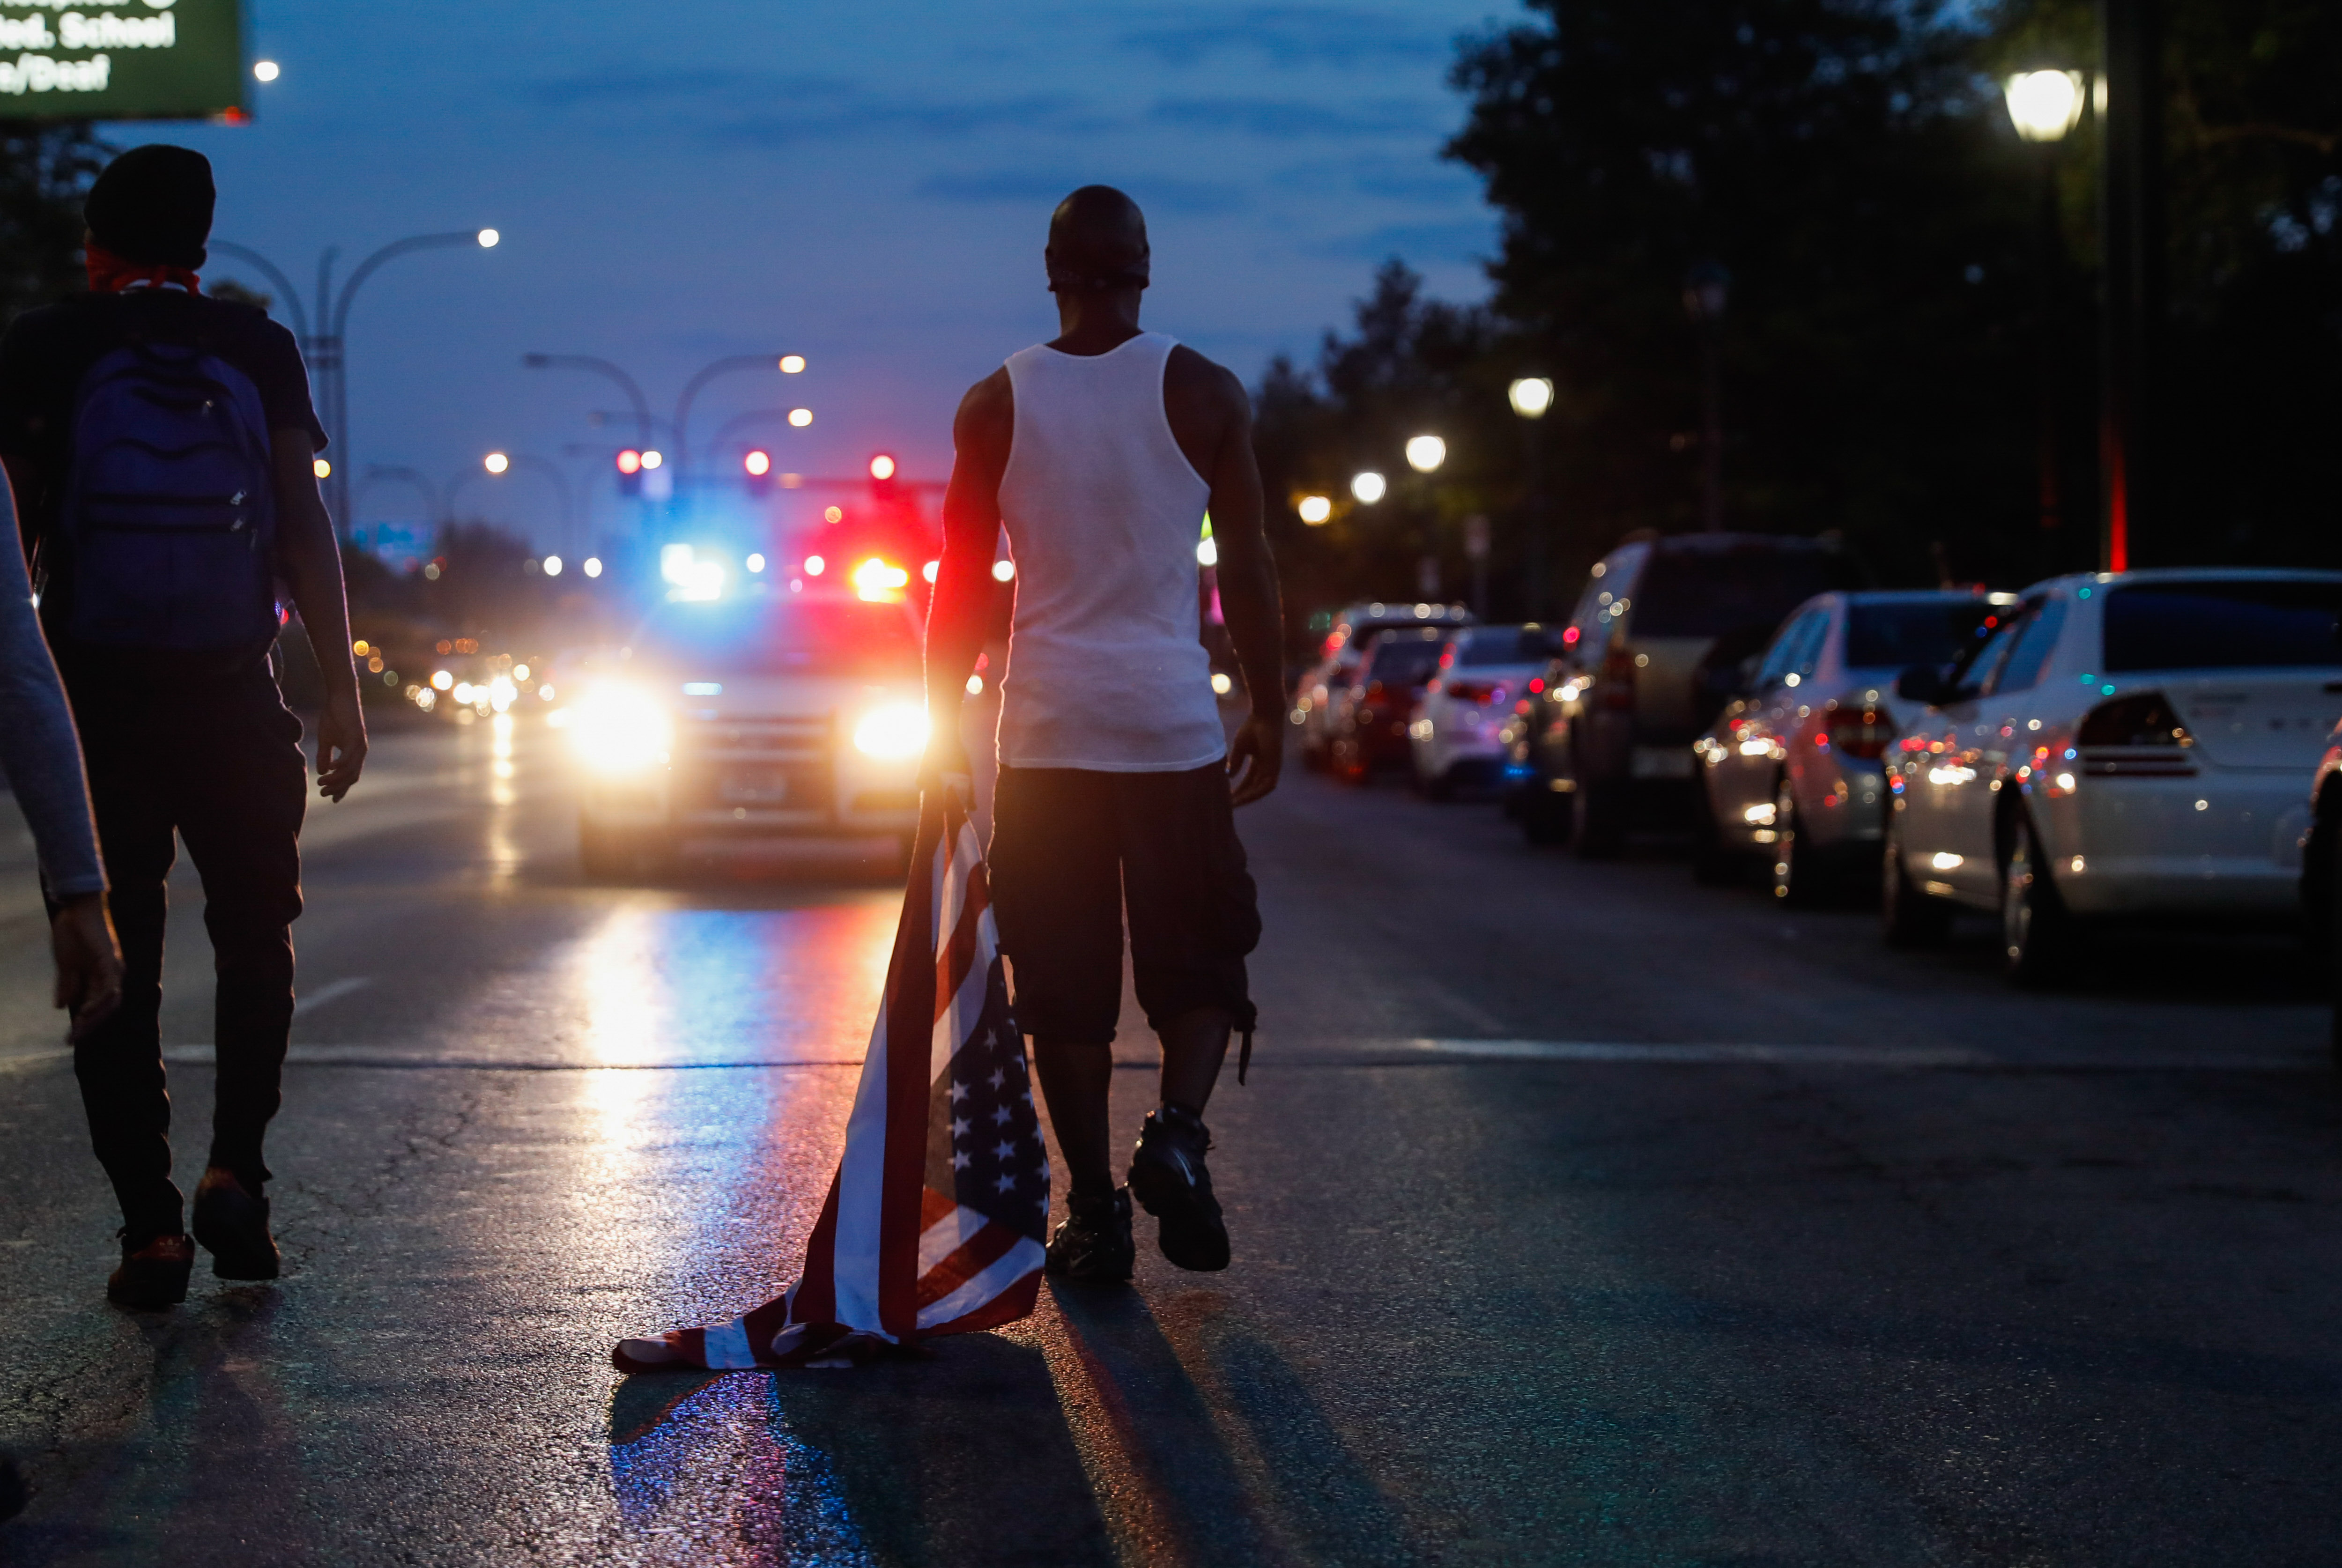 A man taking part in a protest drags a U.S. flag behind him as he walks toward a parked police vehicle.